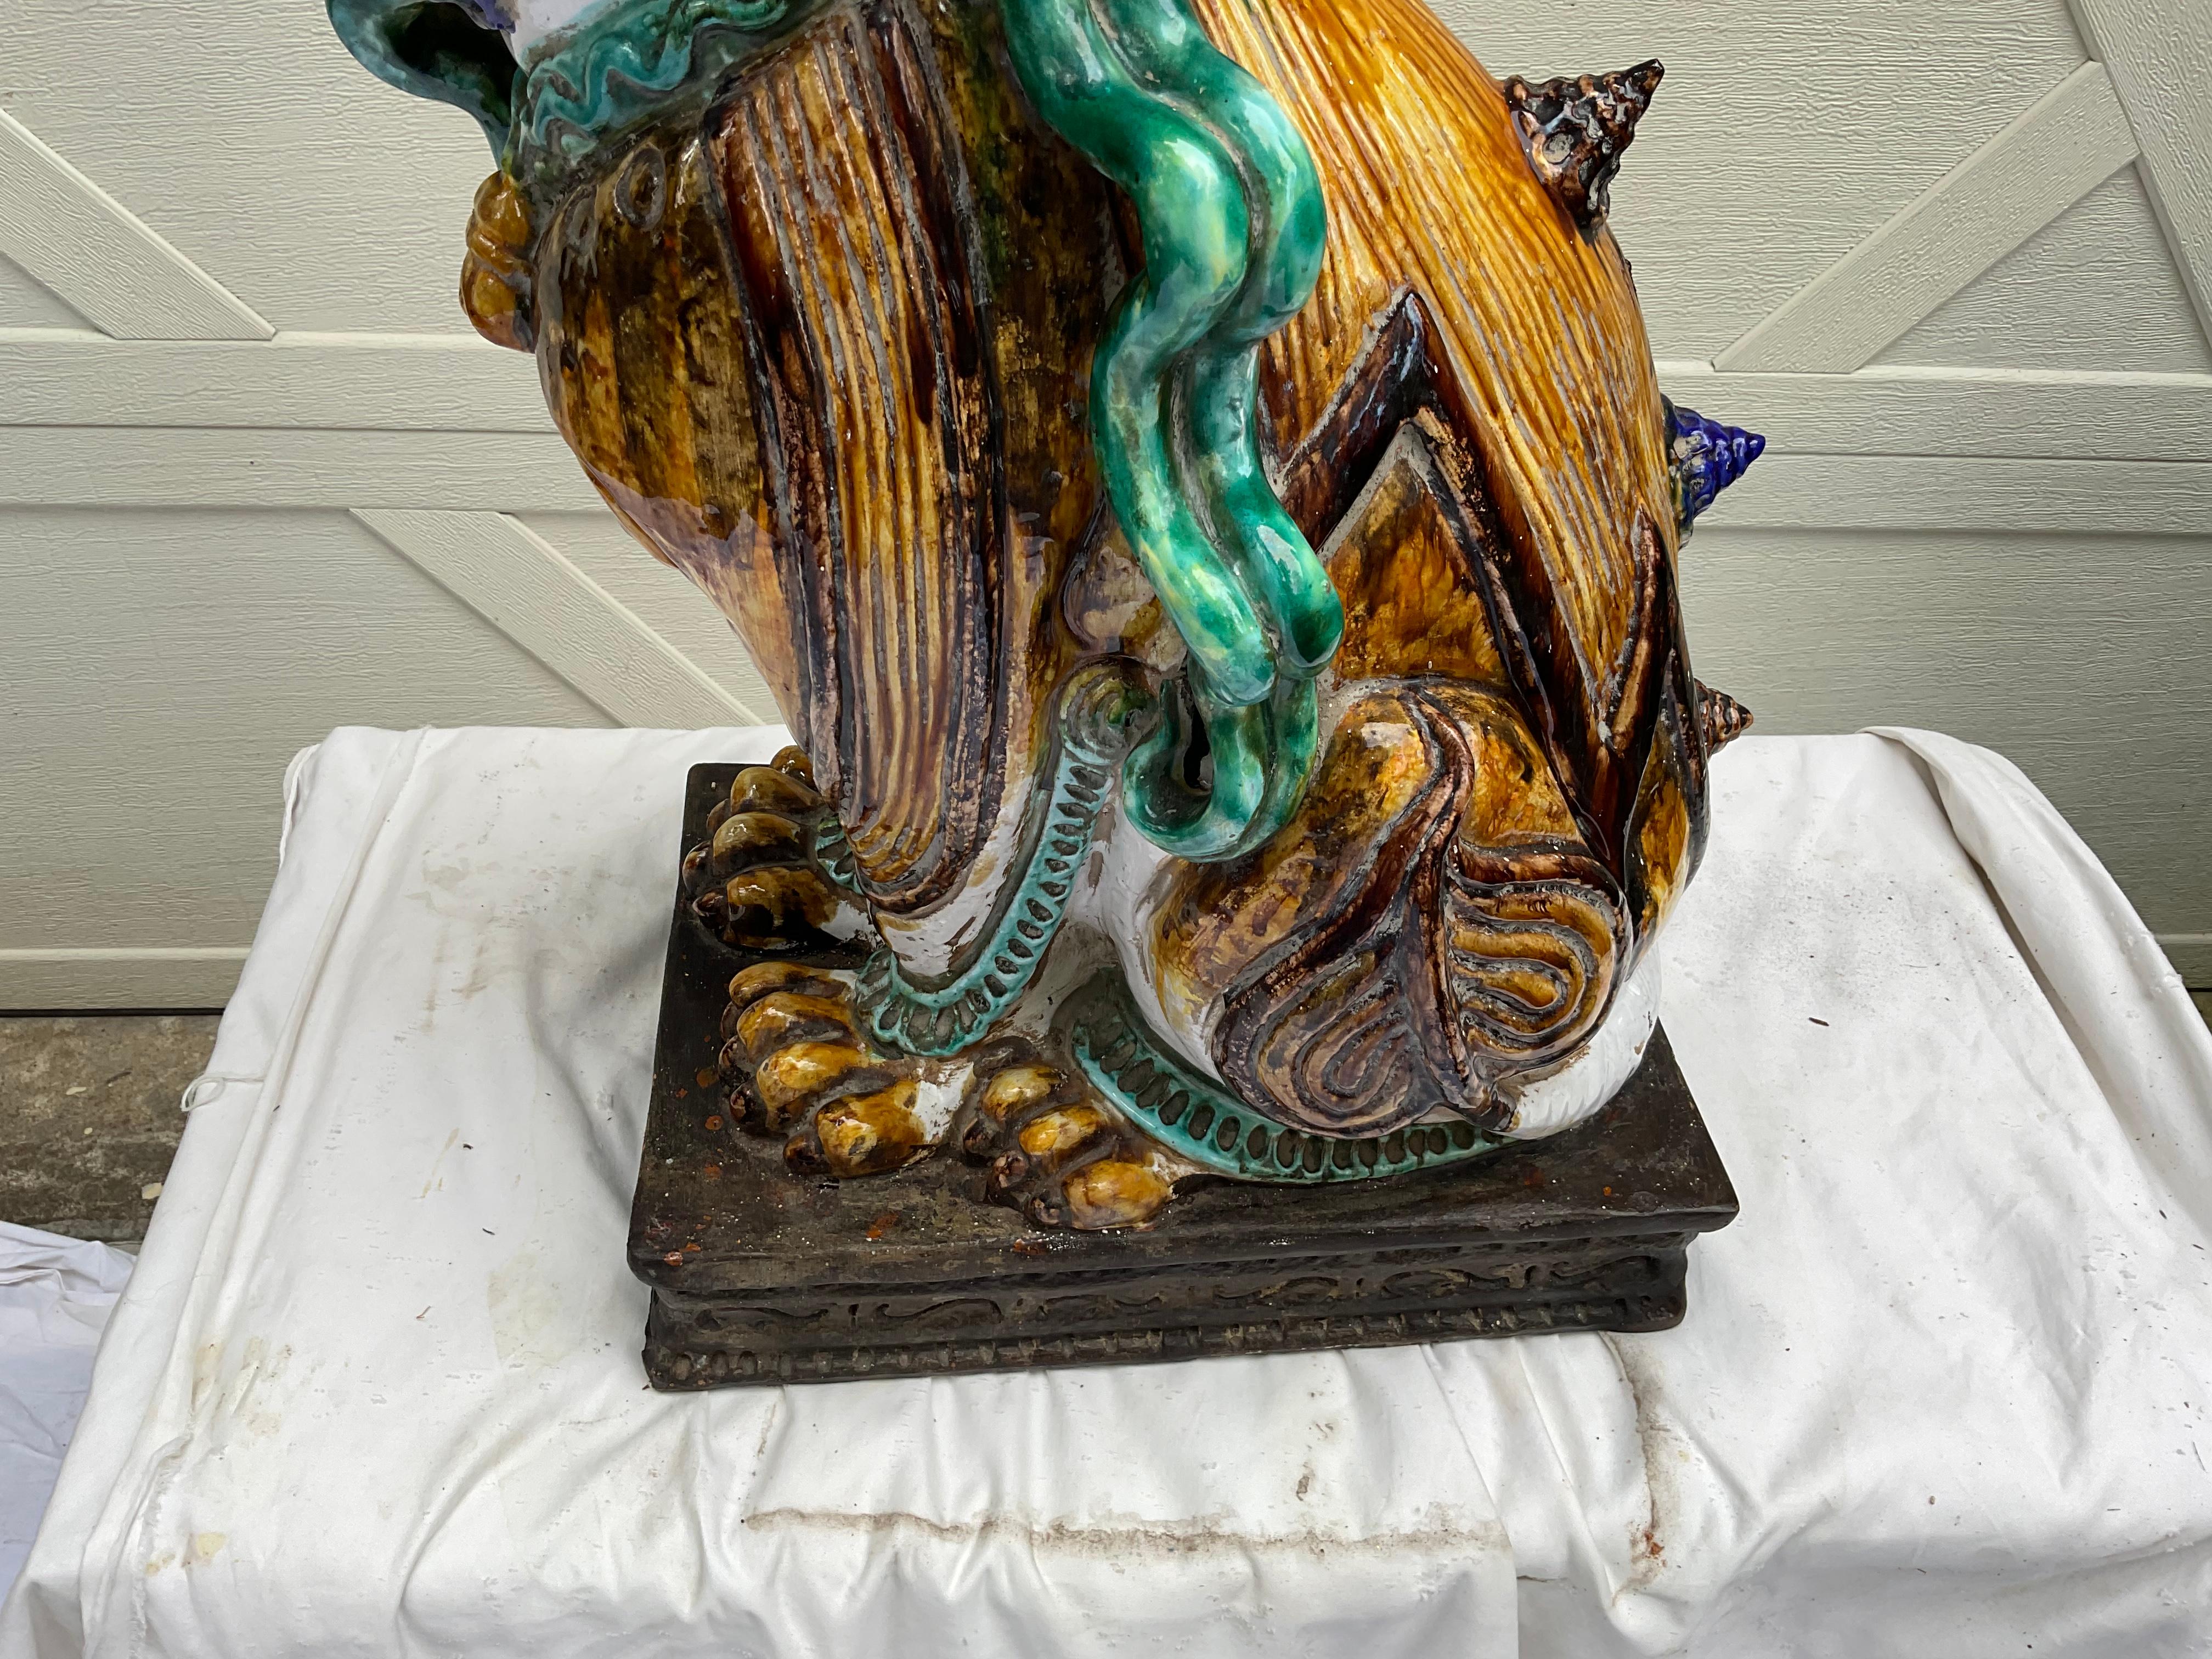 I love this multicolored, embellished foo dog. Quite a statement piece! In very good condition, with 1 corner having an old repair. Typical of terracotta, so please be careful while moving. Very hard to find, this particular style of foo. Only one,